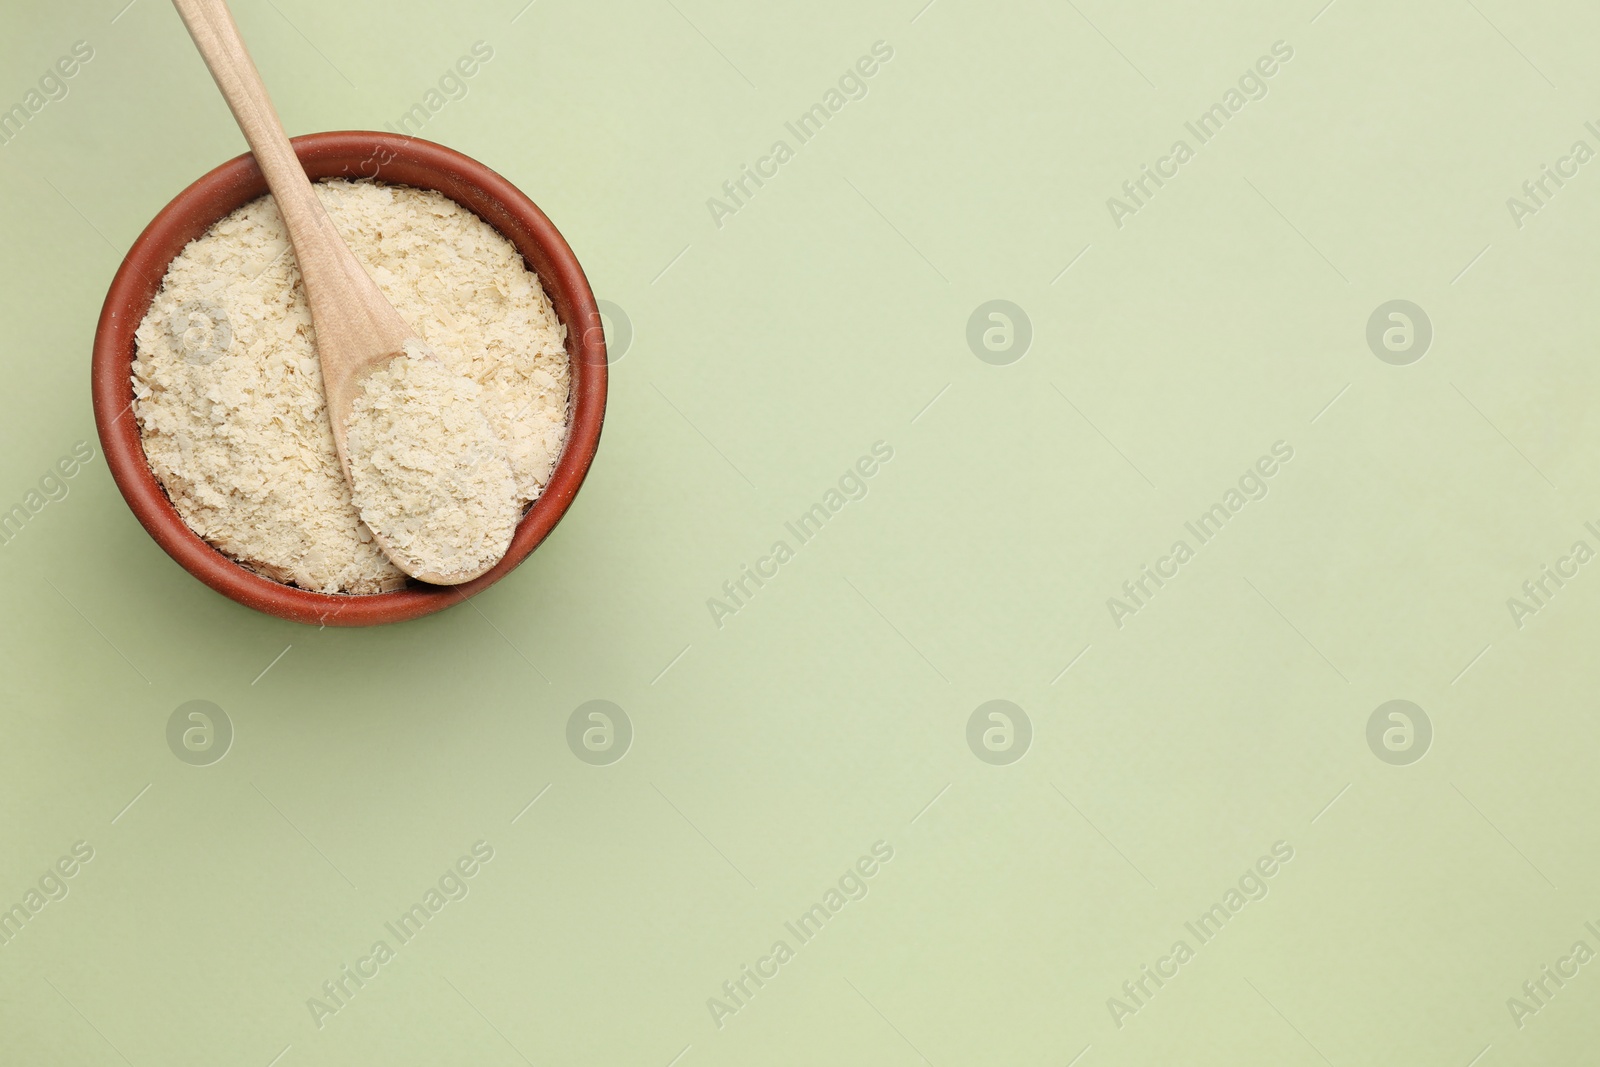 Photo of Beer yeast flakes on light green background, top view. Space for text